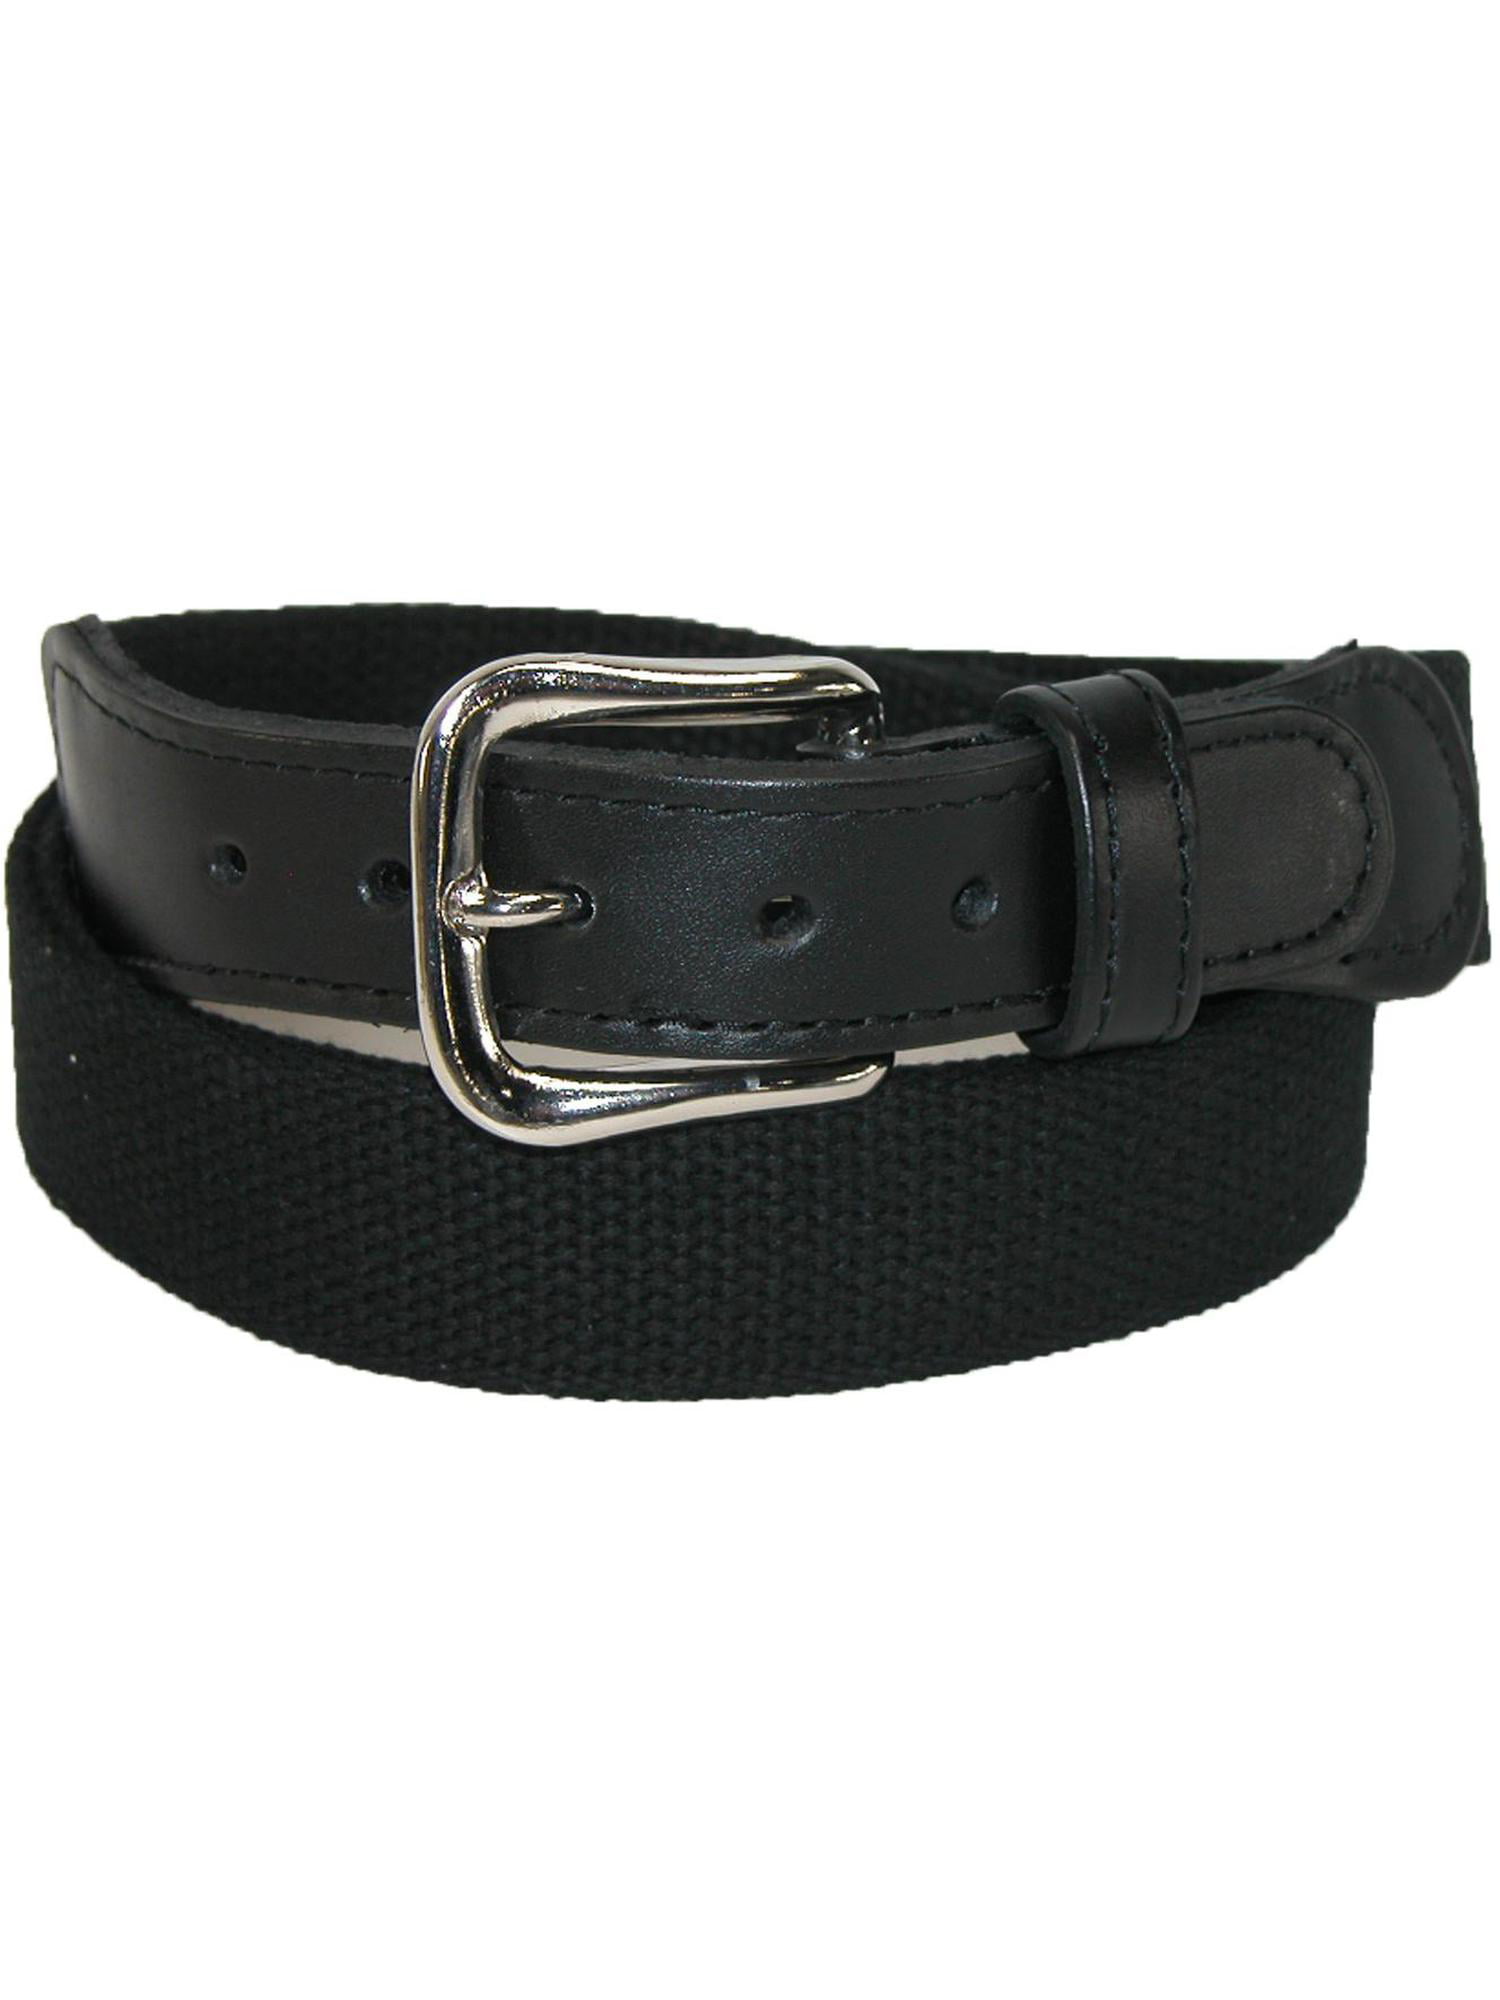 Cookie's Brand Boys' Double Punch Belt Sizes 20" - 32" 